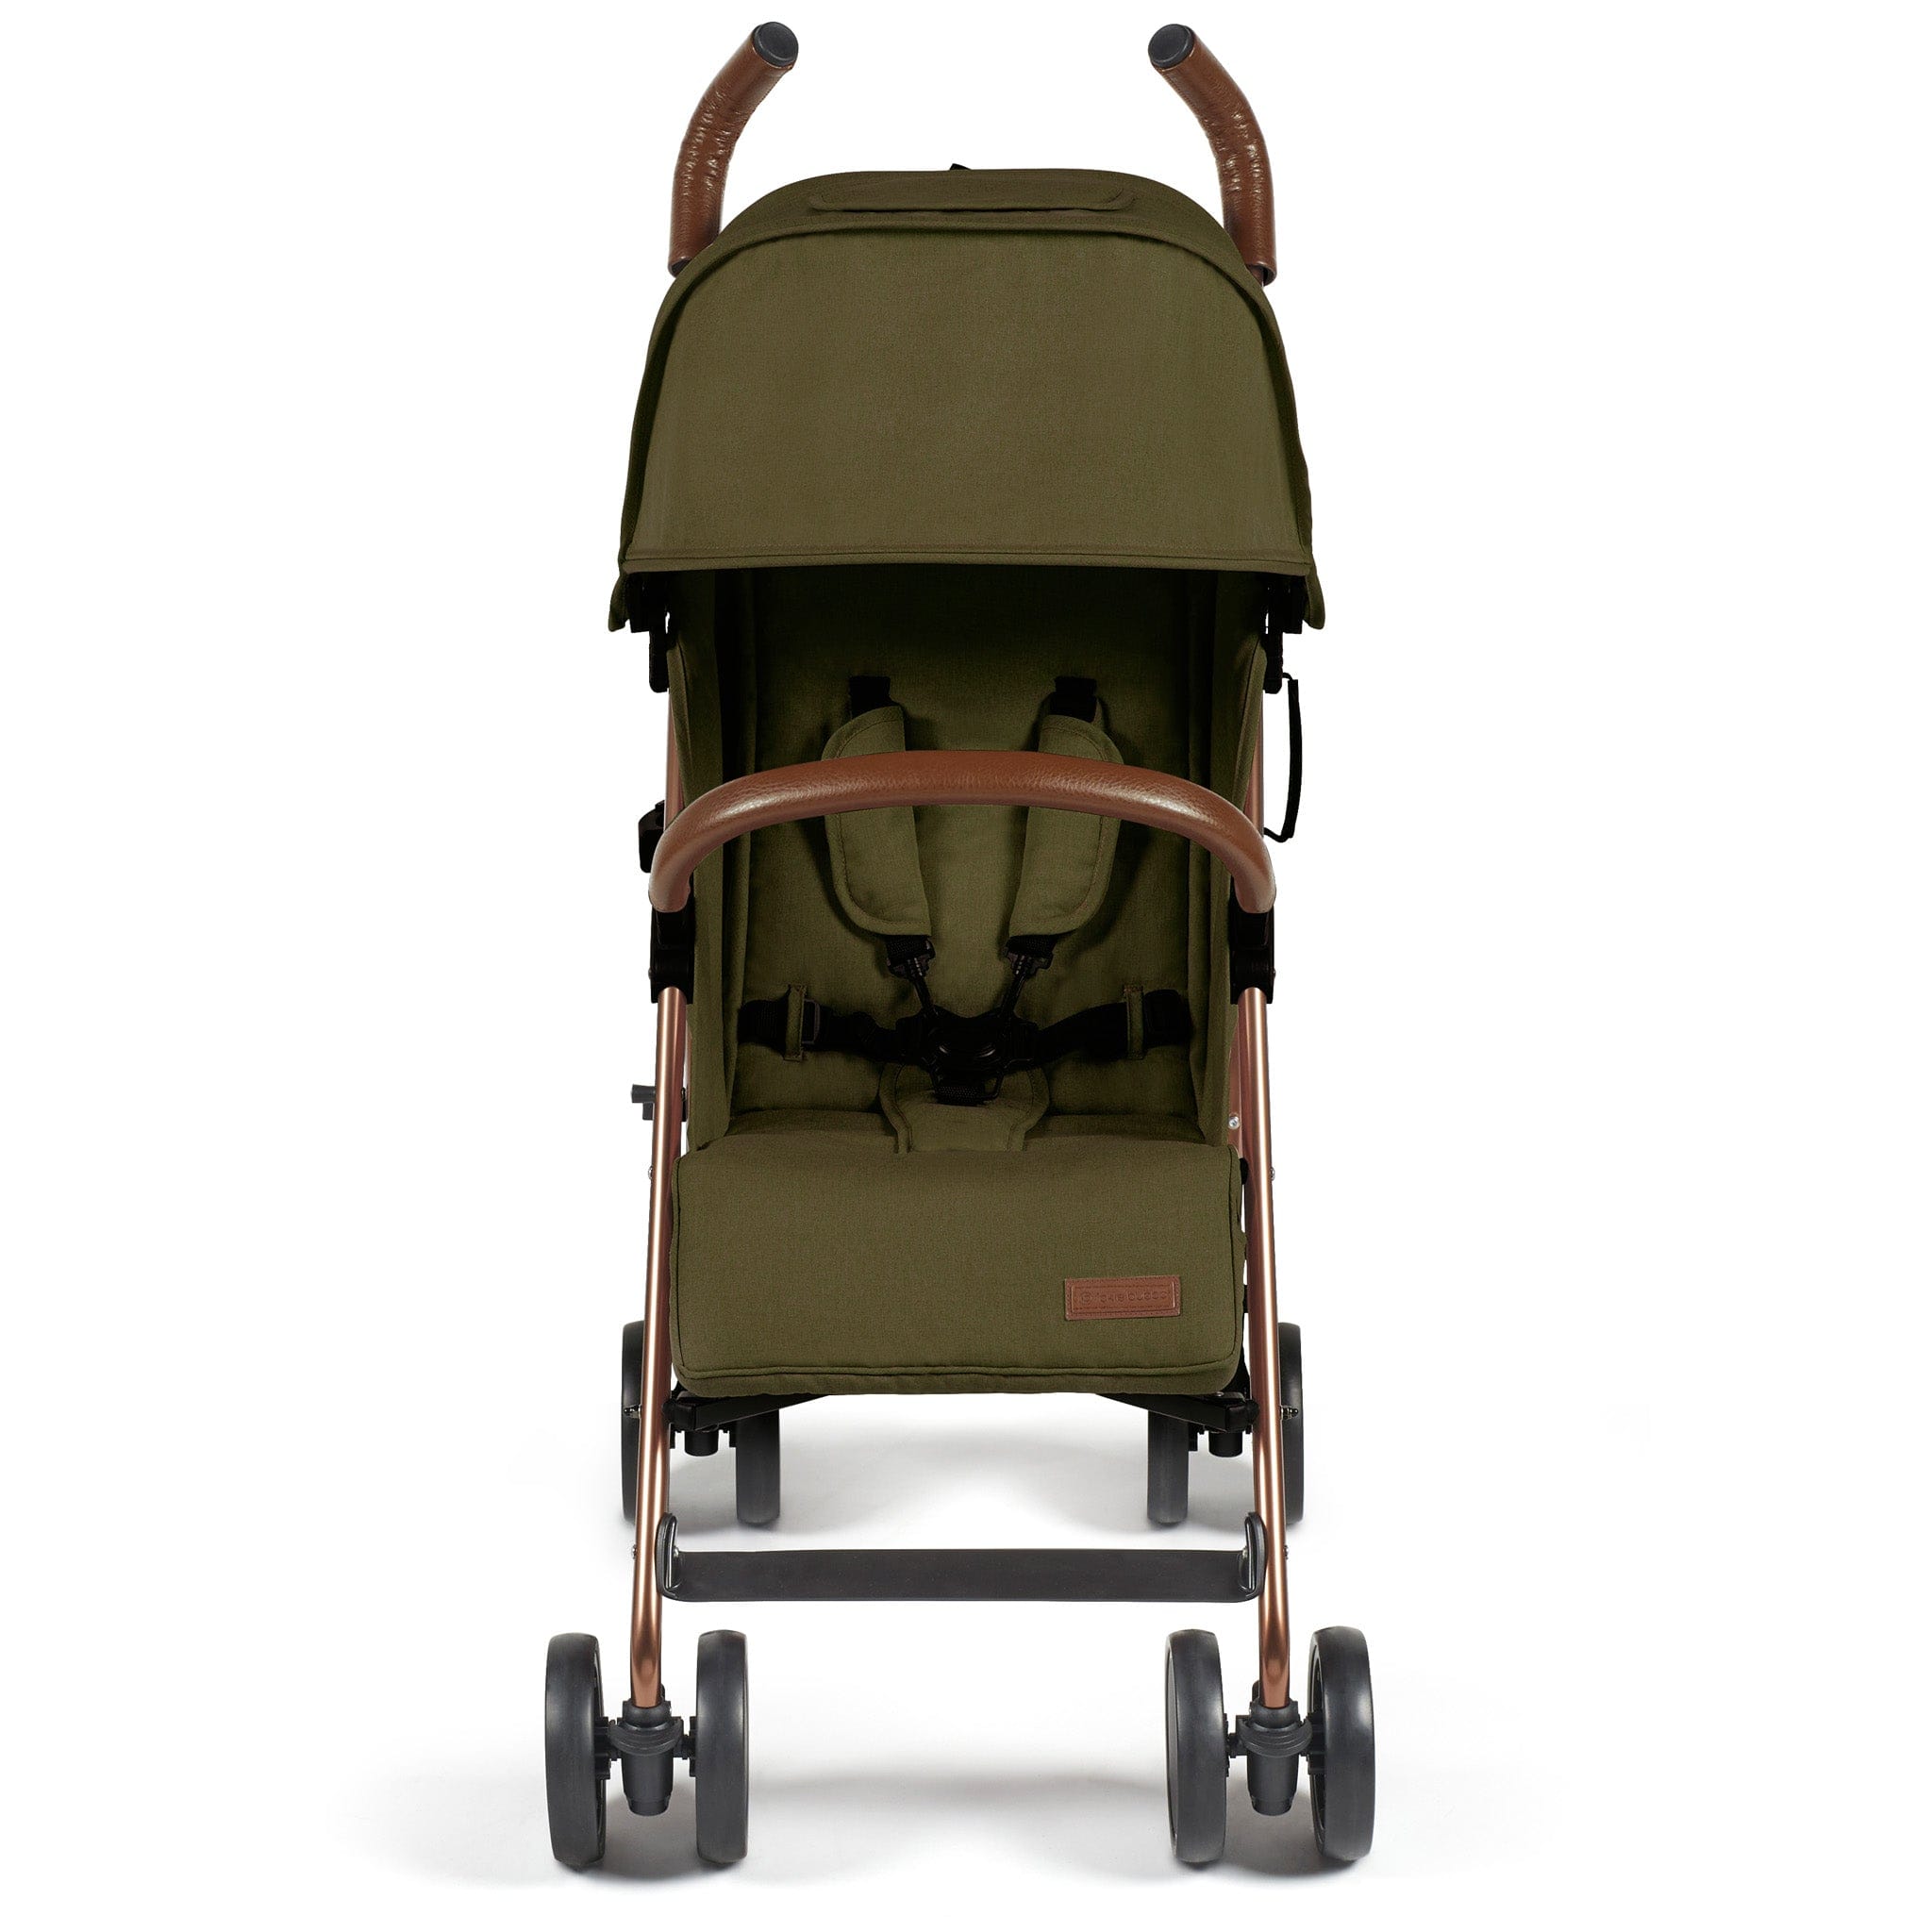 Ickle Bubba Discovery Prime Stroller Rose Gold/Khaki Pushchairs & Buggies 15-002-300-045 0700355999348